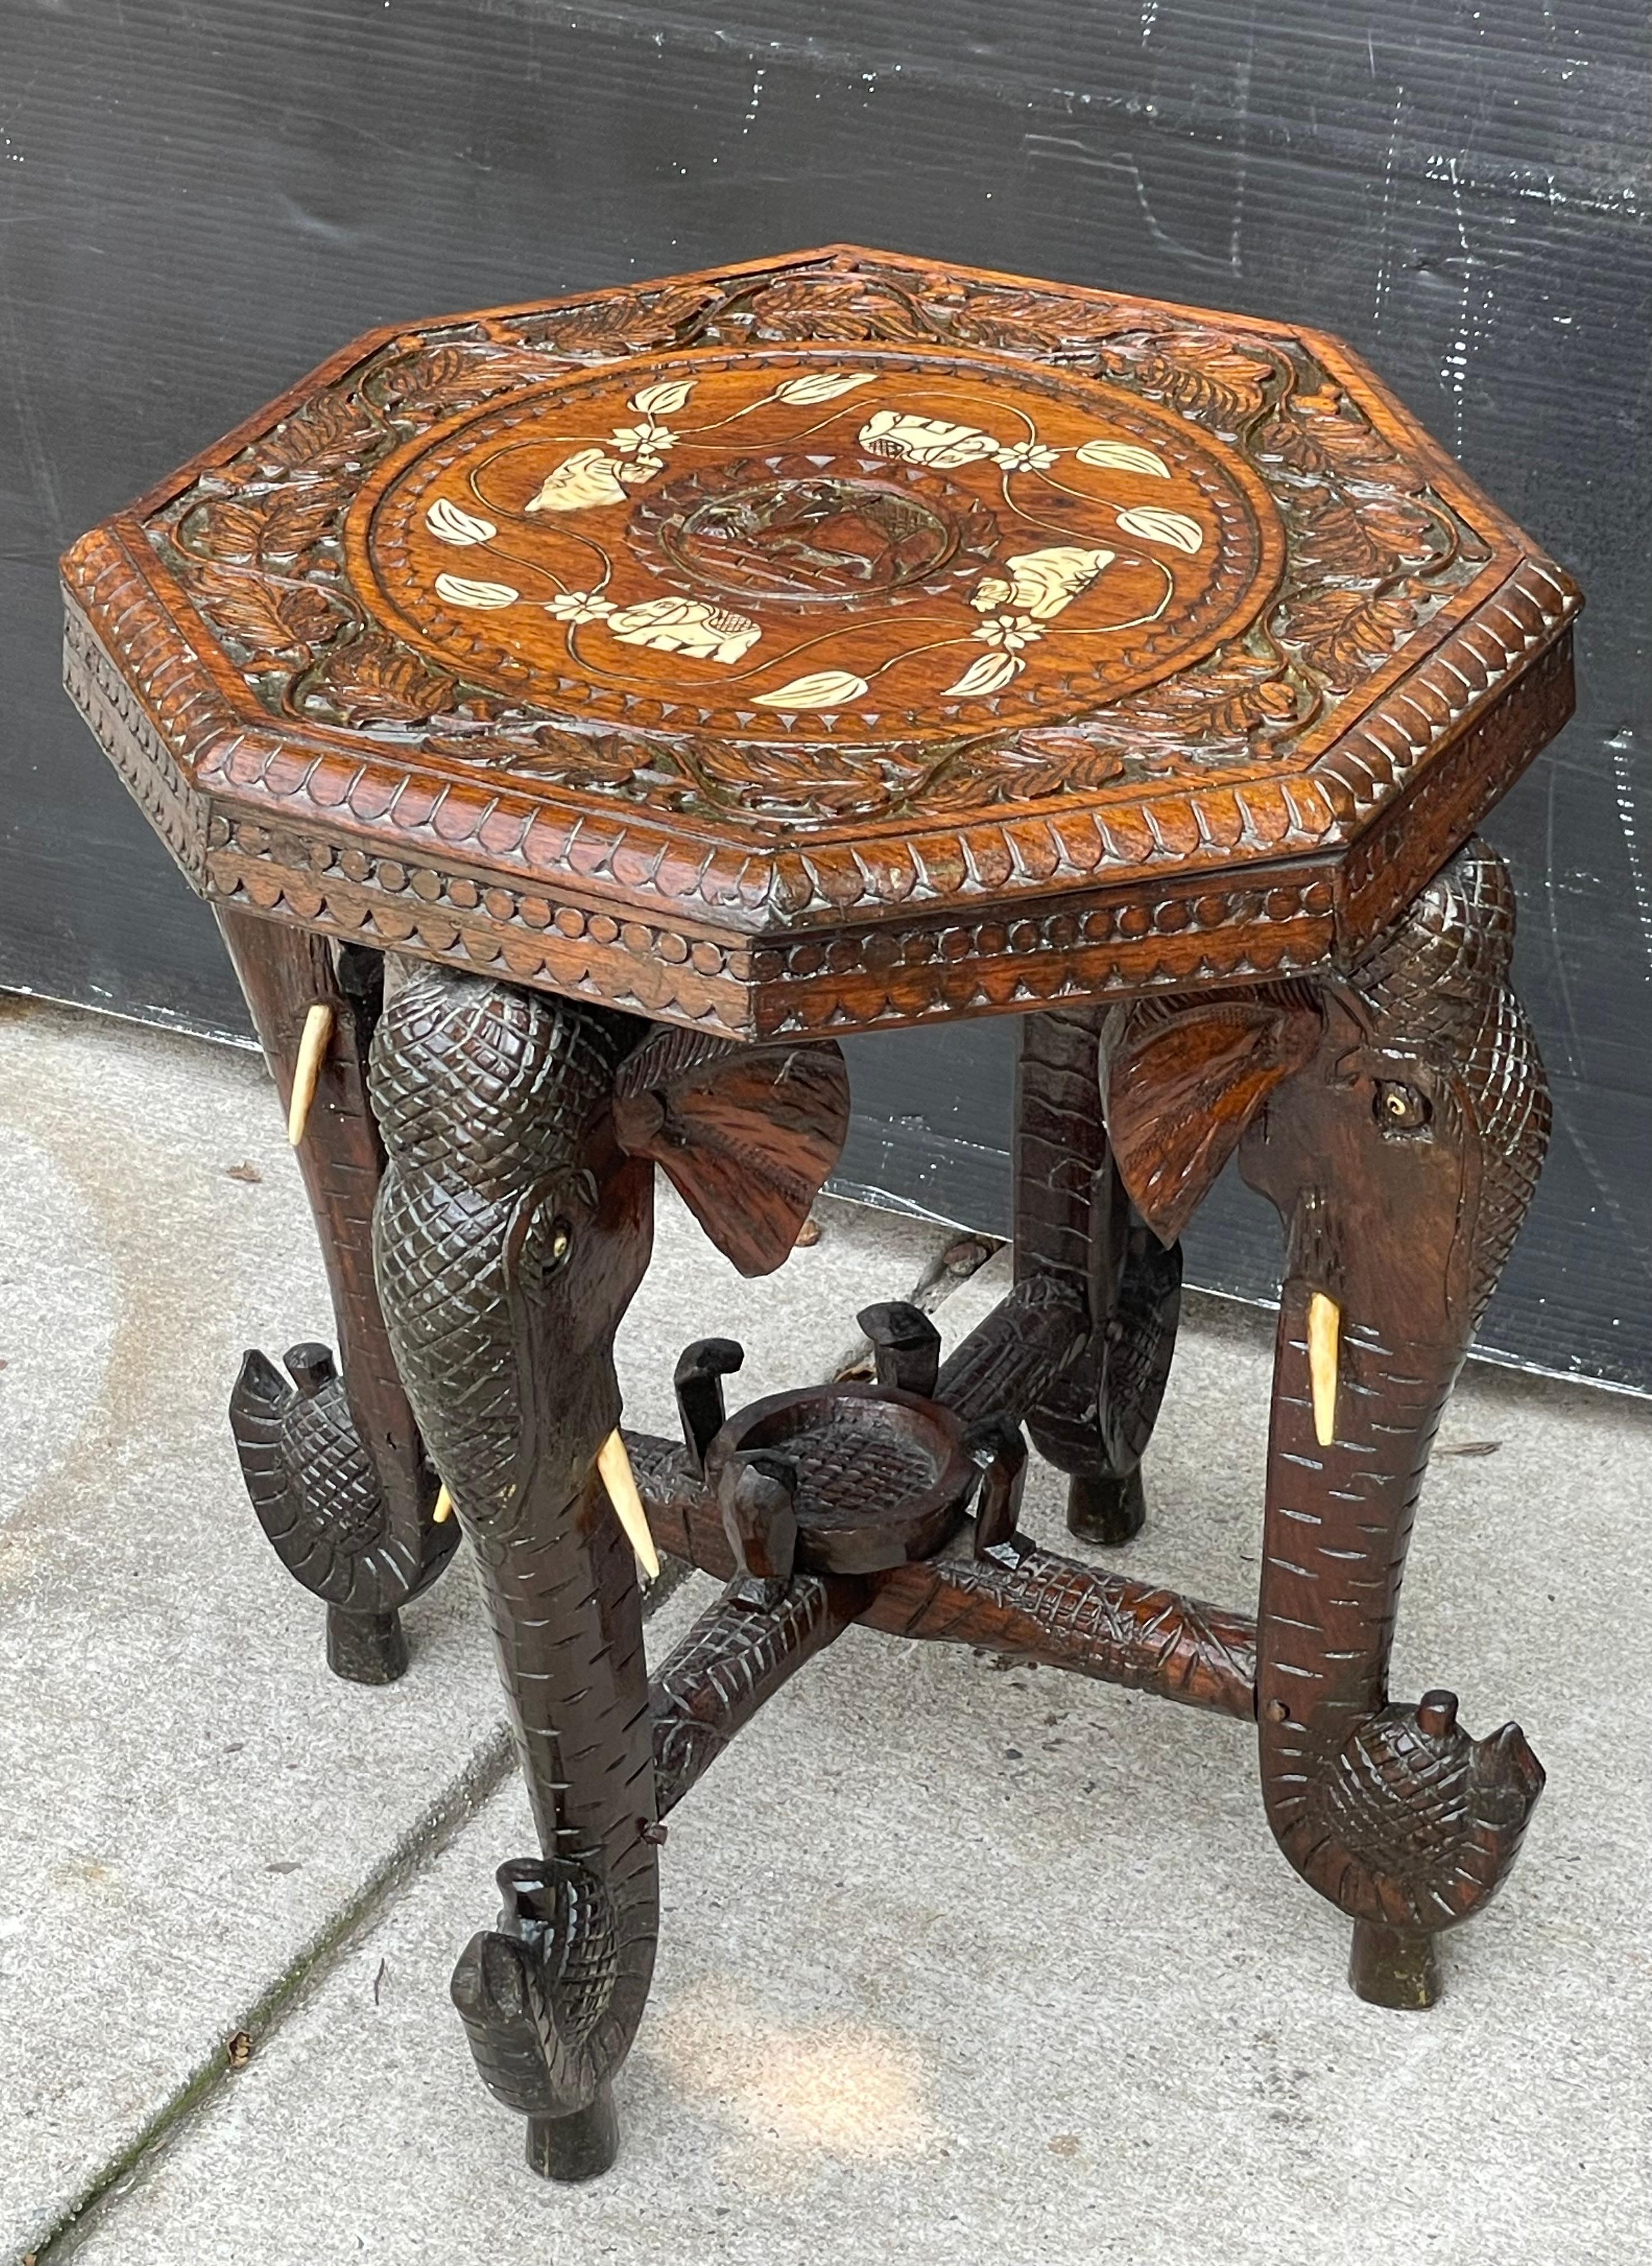 Antique Elephant & Cobra Carved Wood & Bone Side Table  In Good Condition For Sale In Bensalem, PA